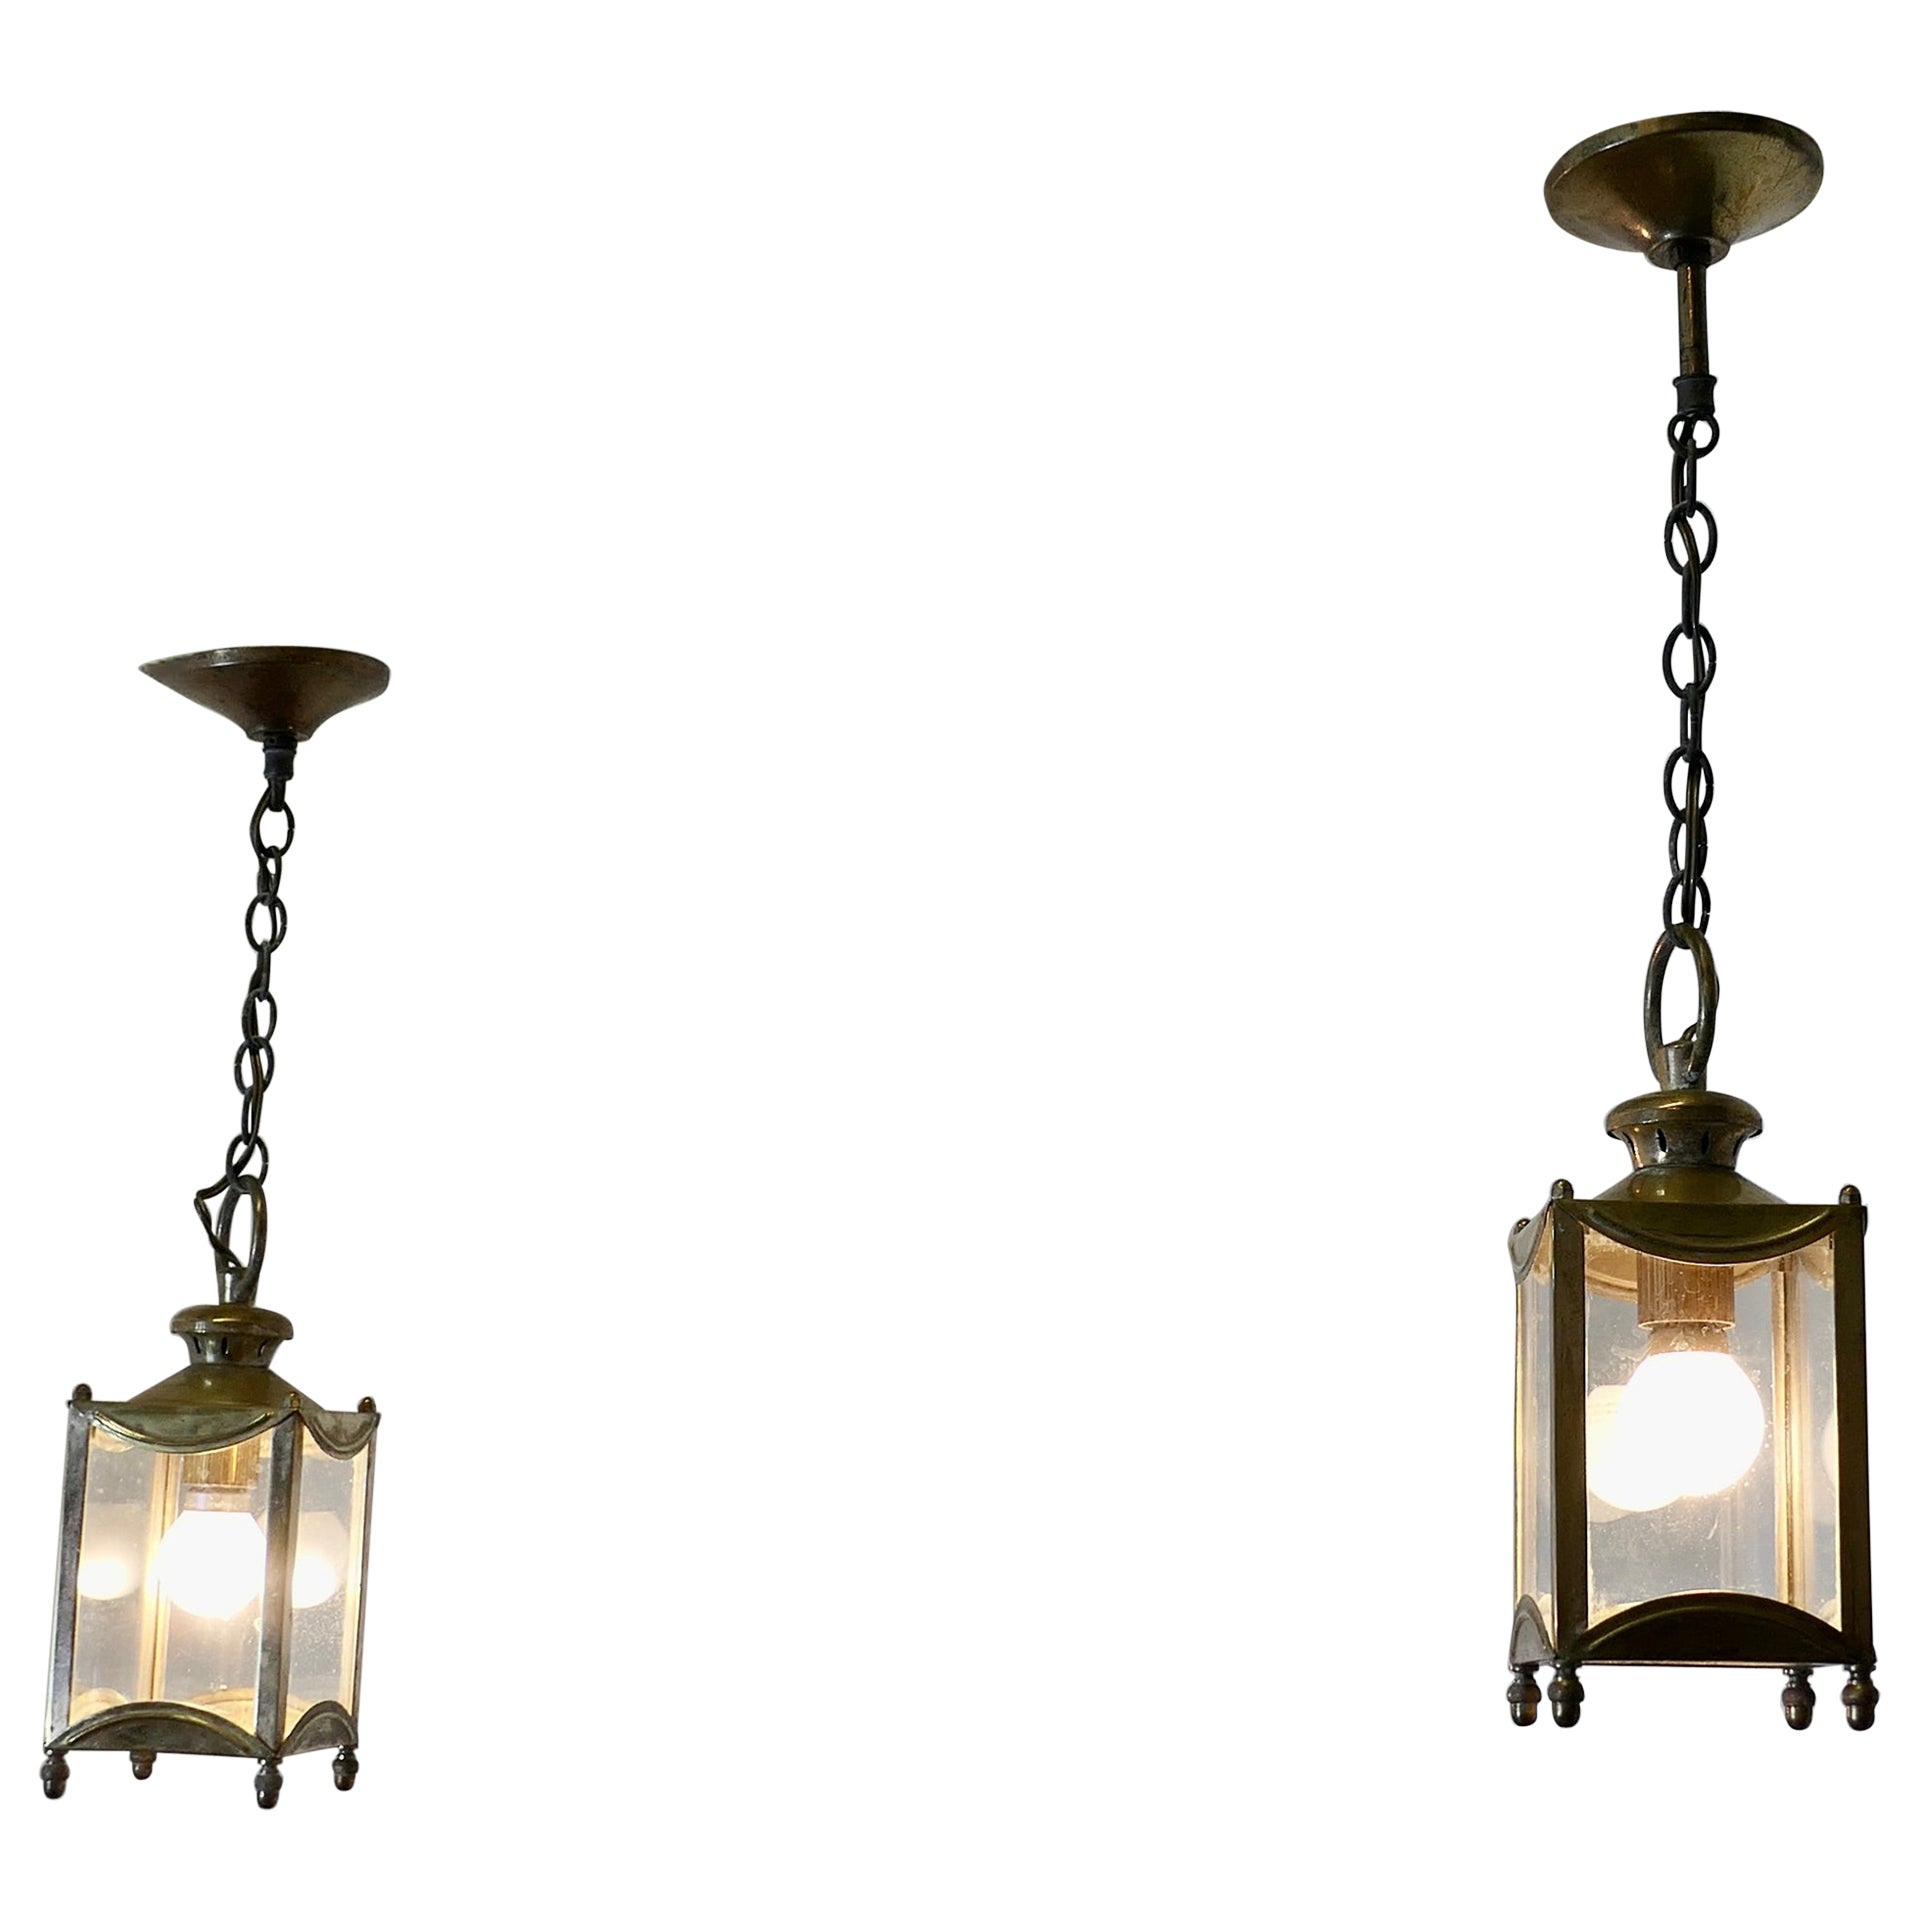 Petite Pair of French Brass and Glass Hall Lantern Lights  This is a lovely pair